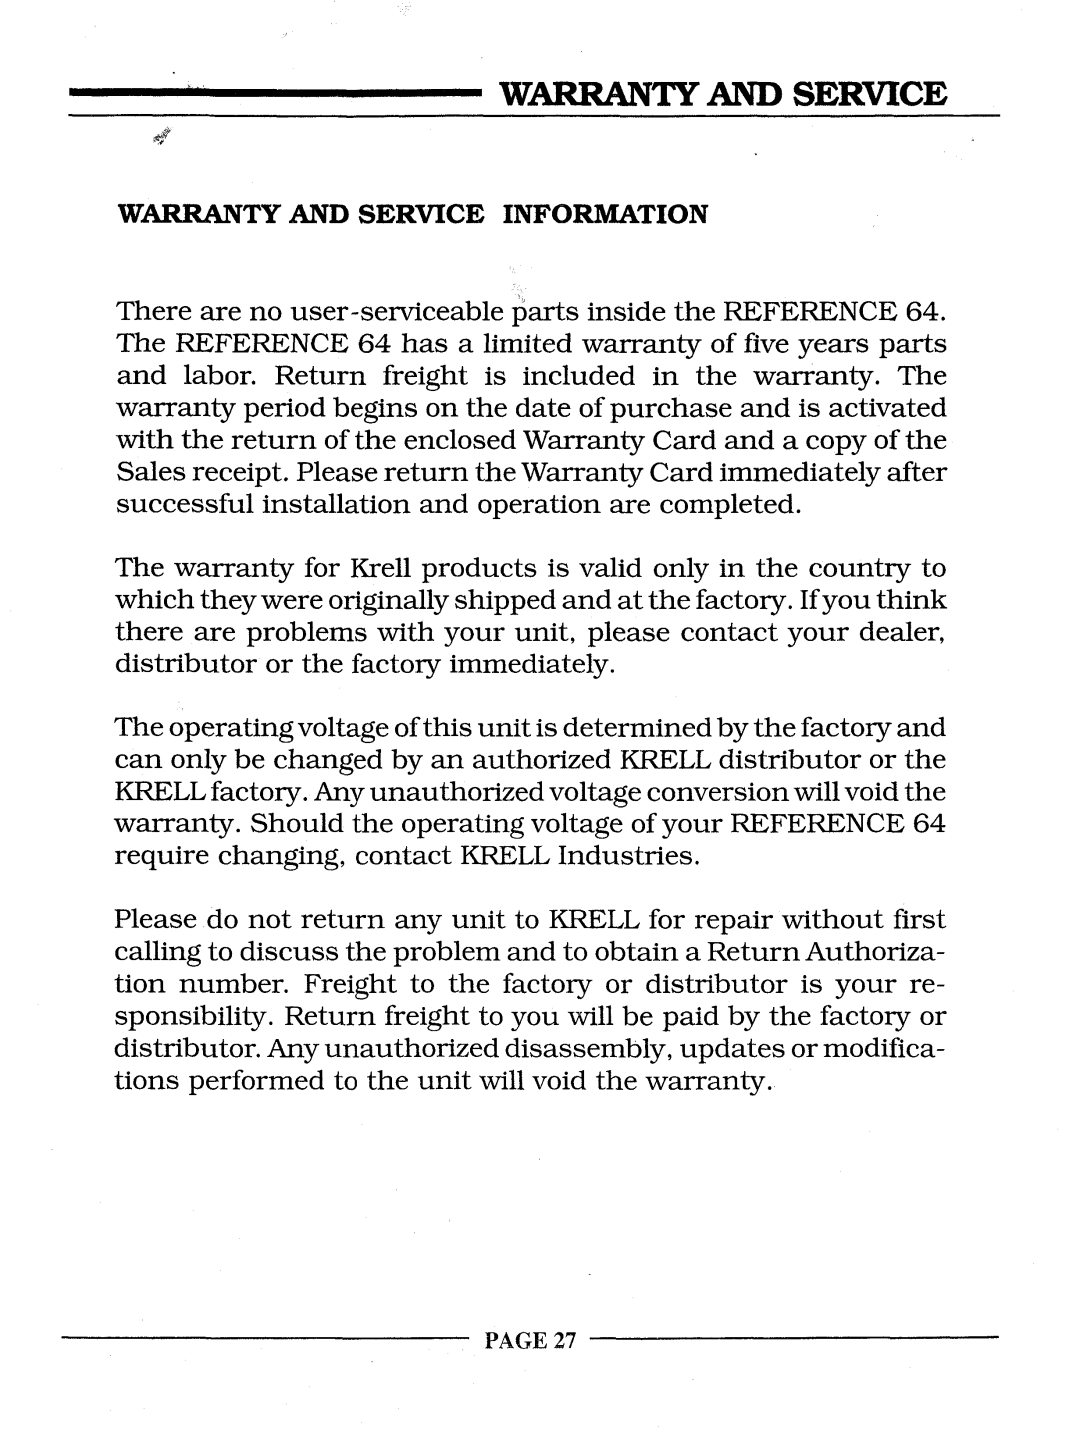 Krell Industries REFERENCE 64 manual Warranty And Service Information 